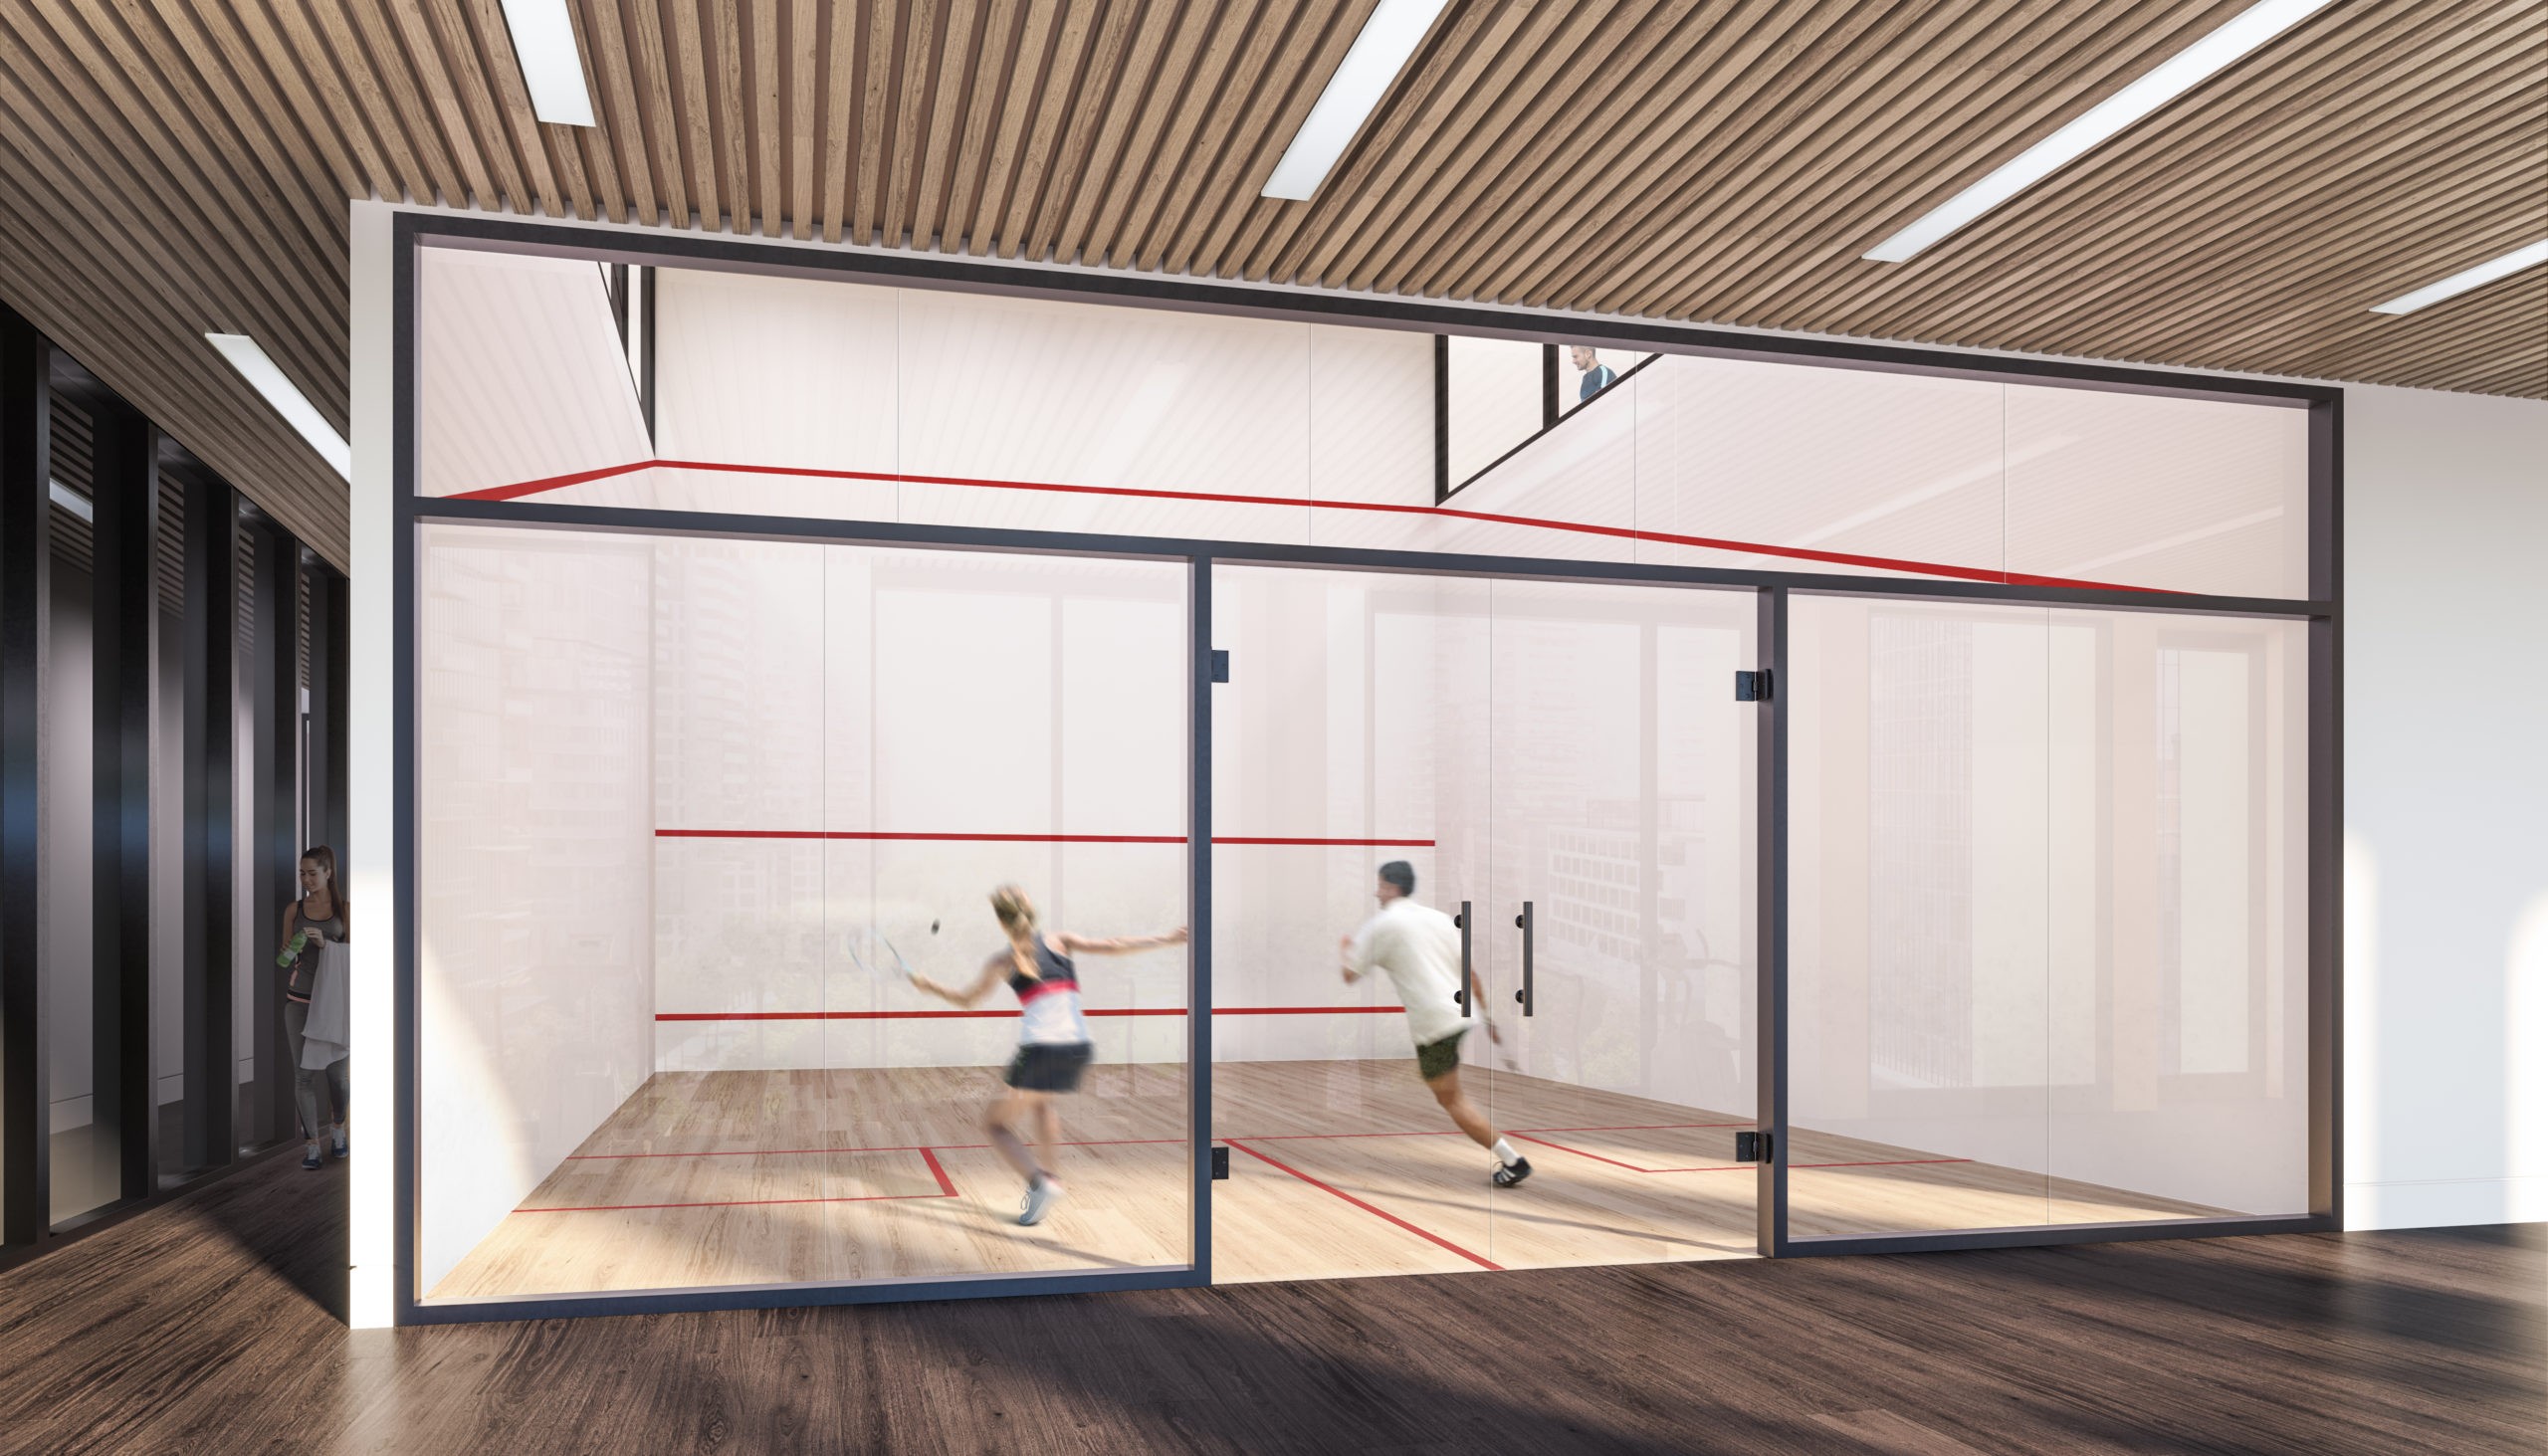 Racketball court interior design, Fitness Amenity Centre Design, Transit City Amenity Centre in Toronto ON, by Cutler